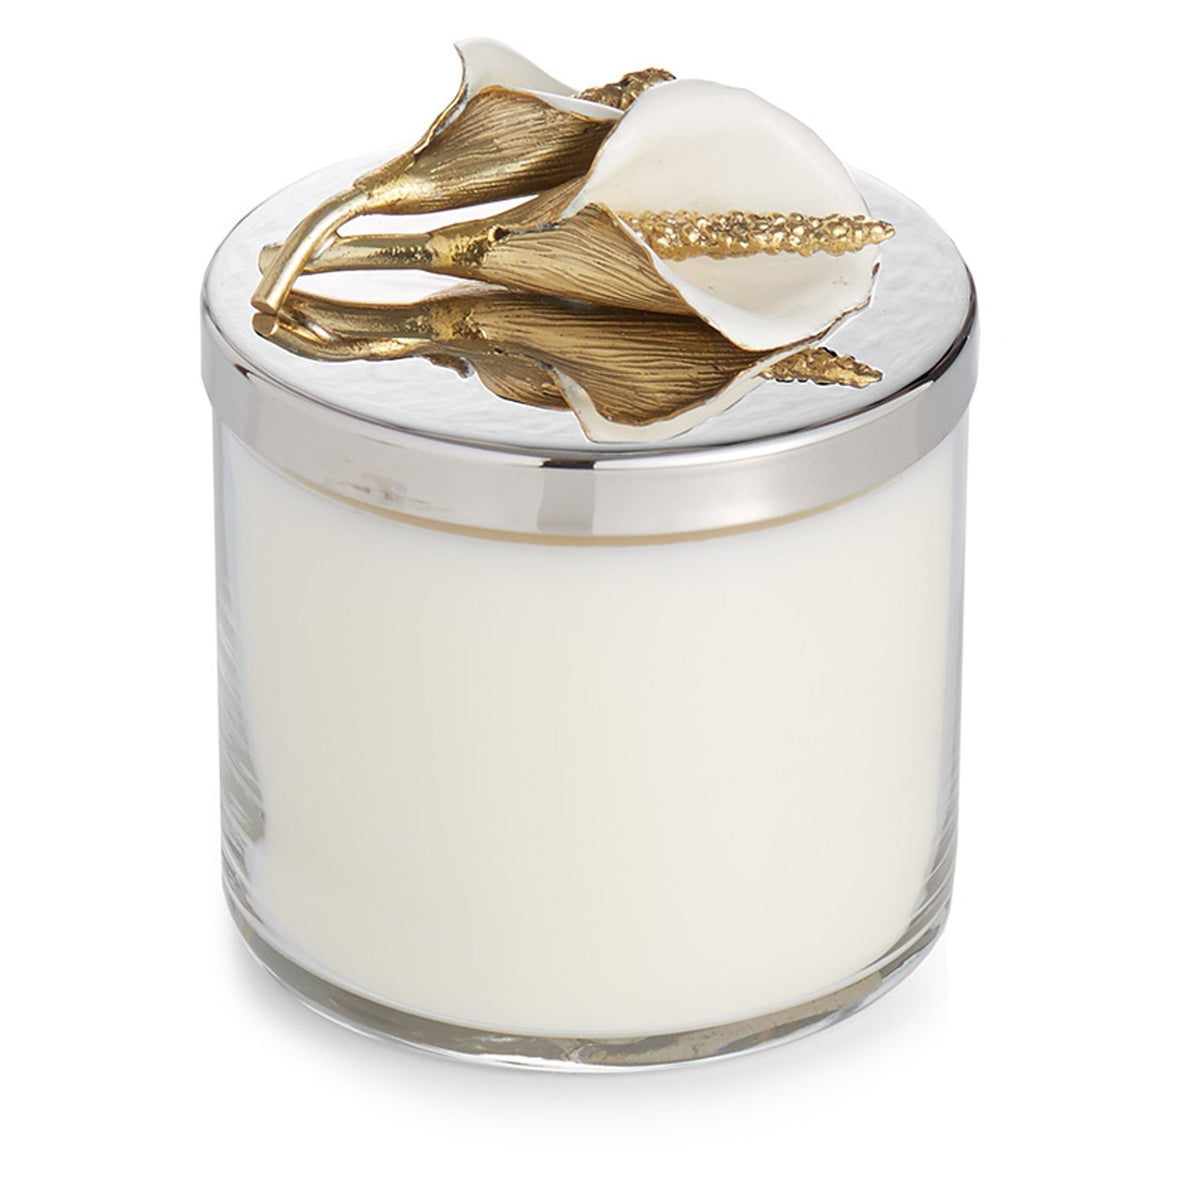 Calla Lily Candle